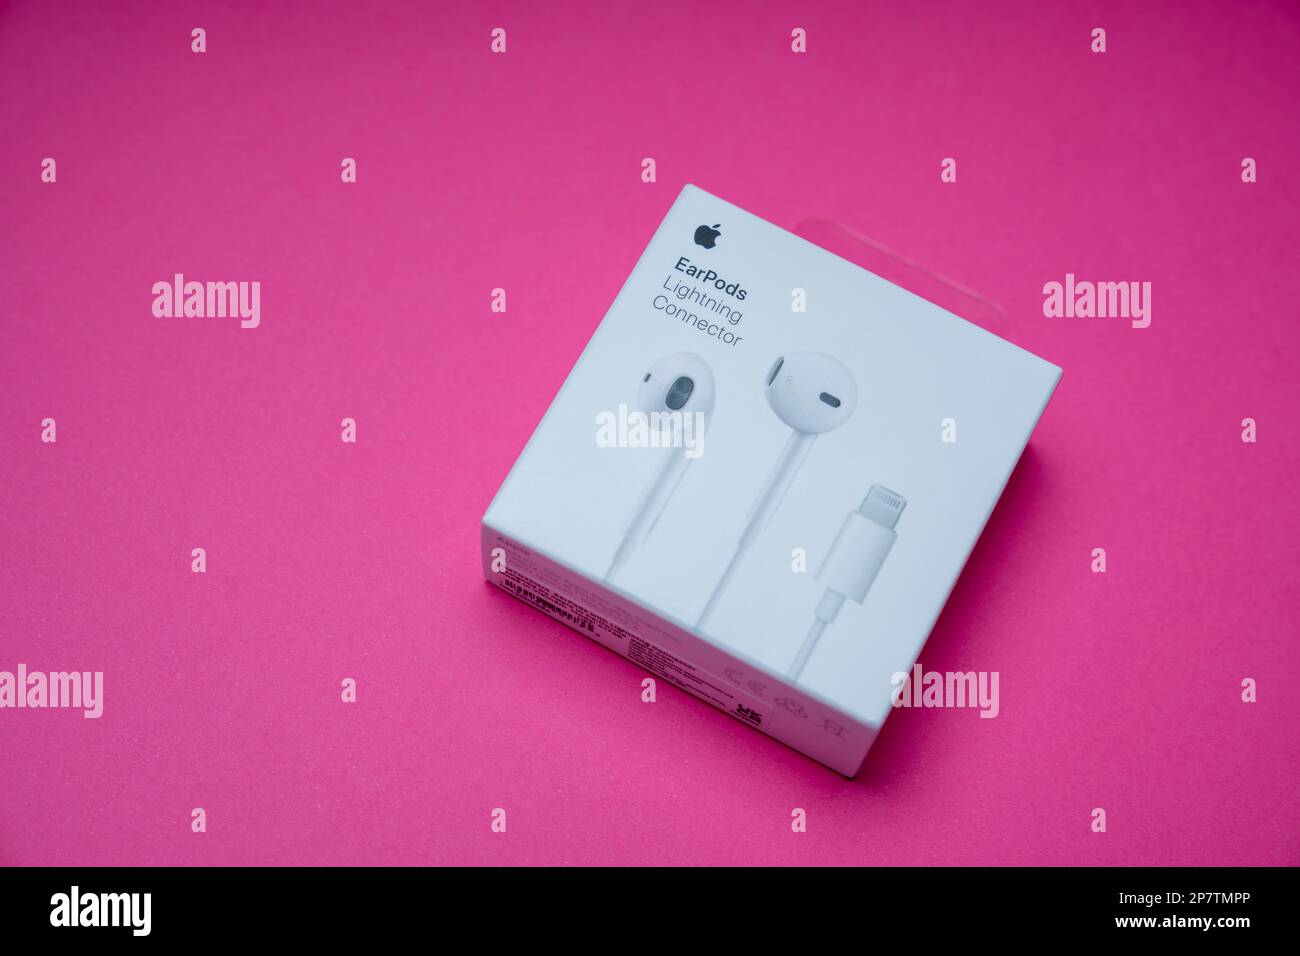 New Apple Earpods, Airpods white earphones for listening to music and podcasts in an closed box. Isolated pink background. Stock Photo